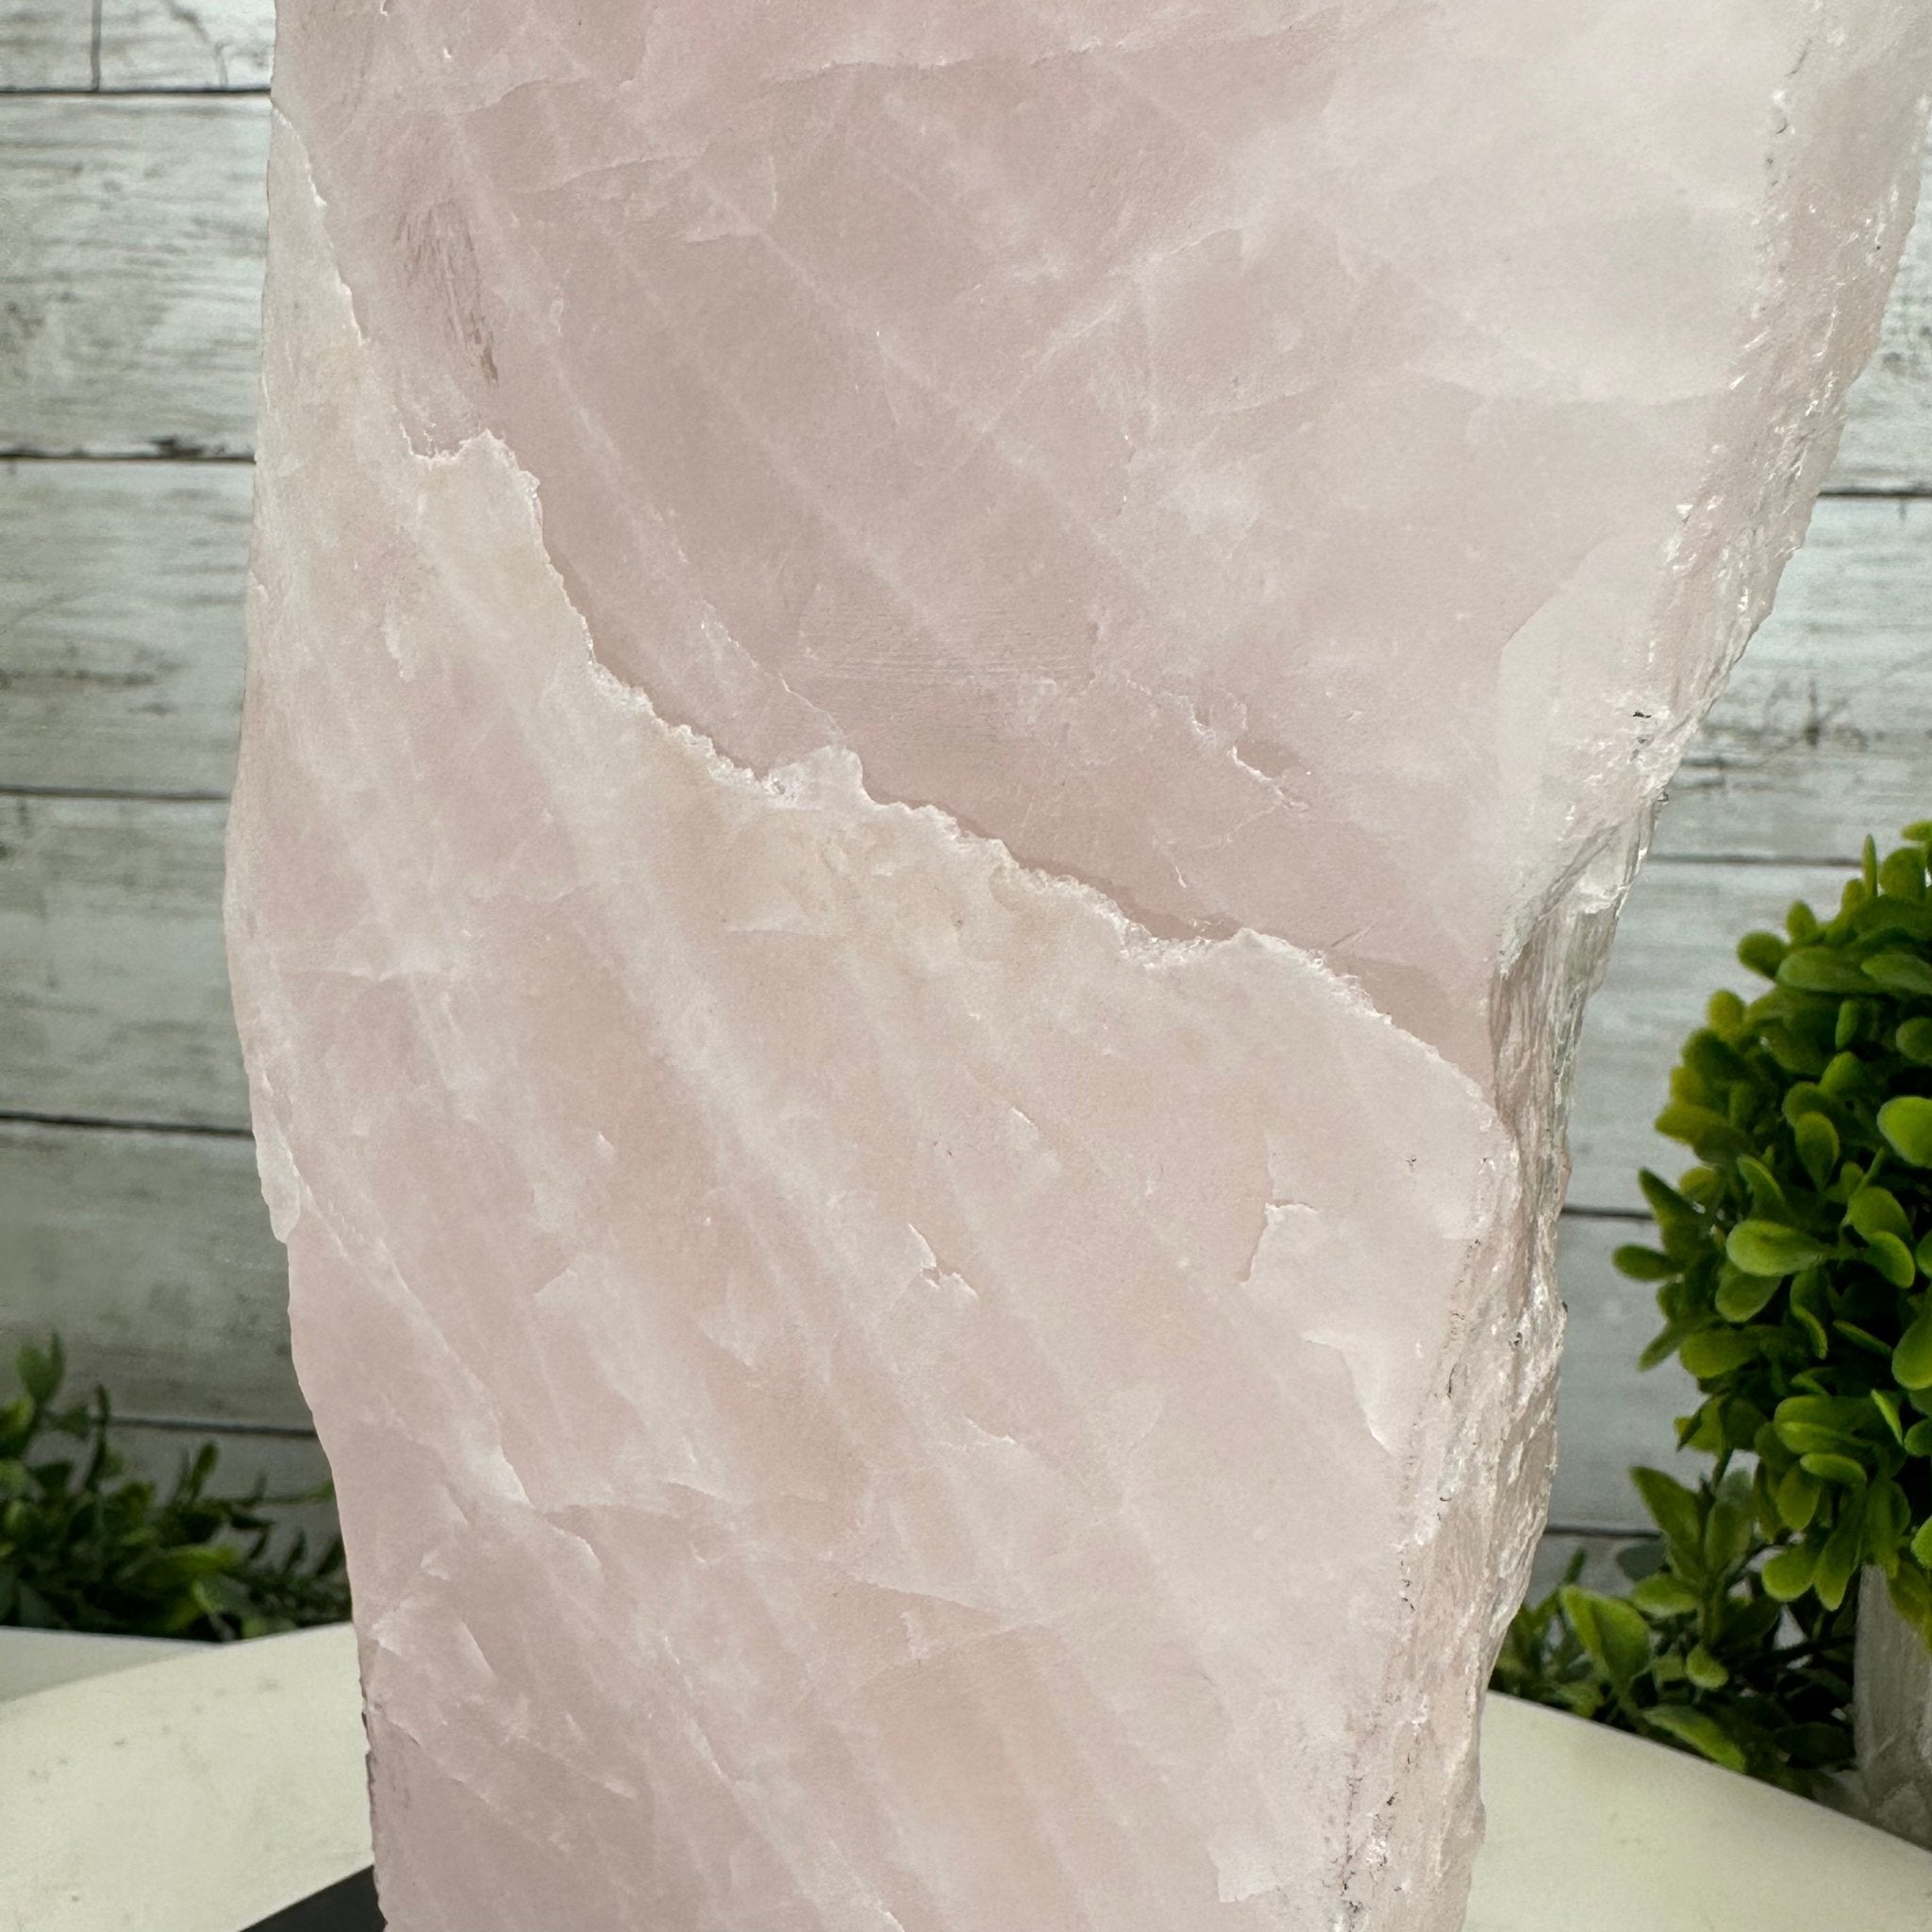 Rose Quartz Polished Slice with Rough Edges on a Wood Base Model 12.25" Tall Model #6100RQ-044 by Brazil Gems - Brazil GemsBrazil GemsRose Quartz Polished Slice with Rough Edges on a Wood Base Model 12.25" Tall Model #6100RQ-044 by Brazil GemsSlices on Wood Bases6100RQ-044